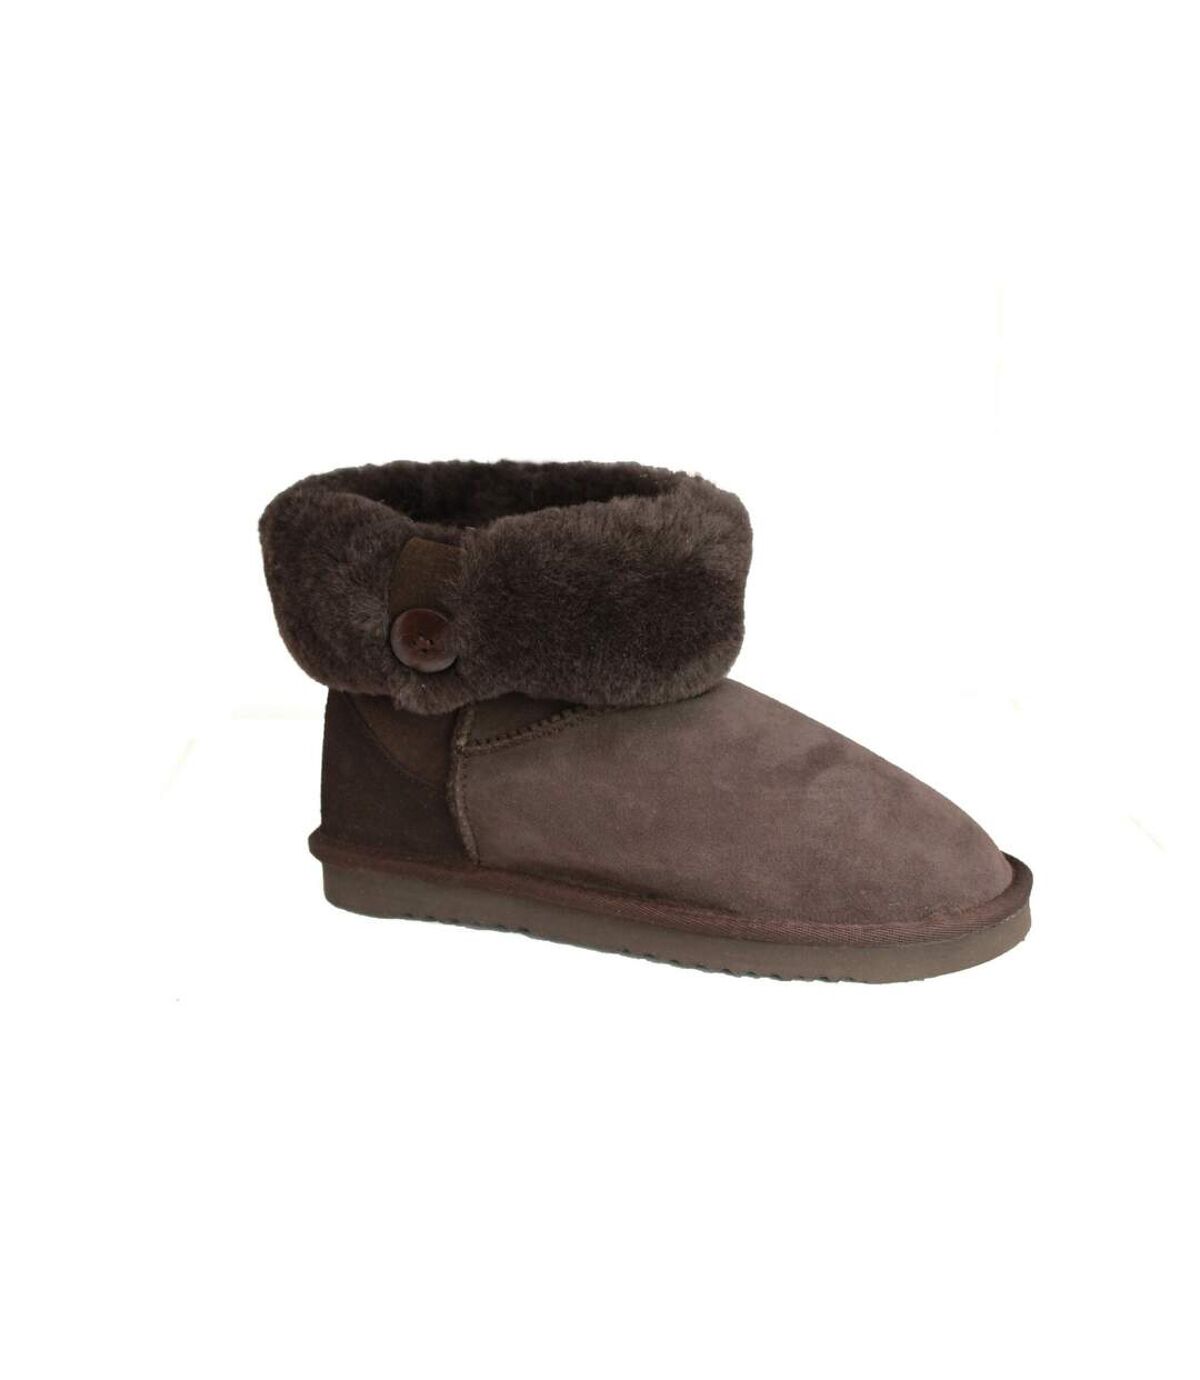 Eastern Counties Leather Womens/Ladies Freya Cuff And Button Sheepskin Boots (Chocolate) - UTEL172